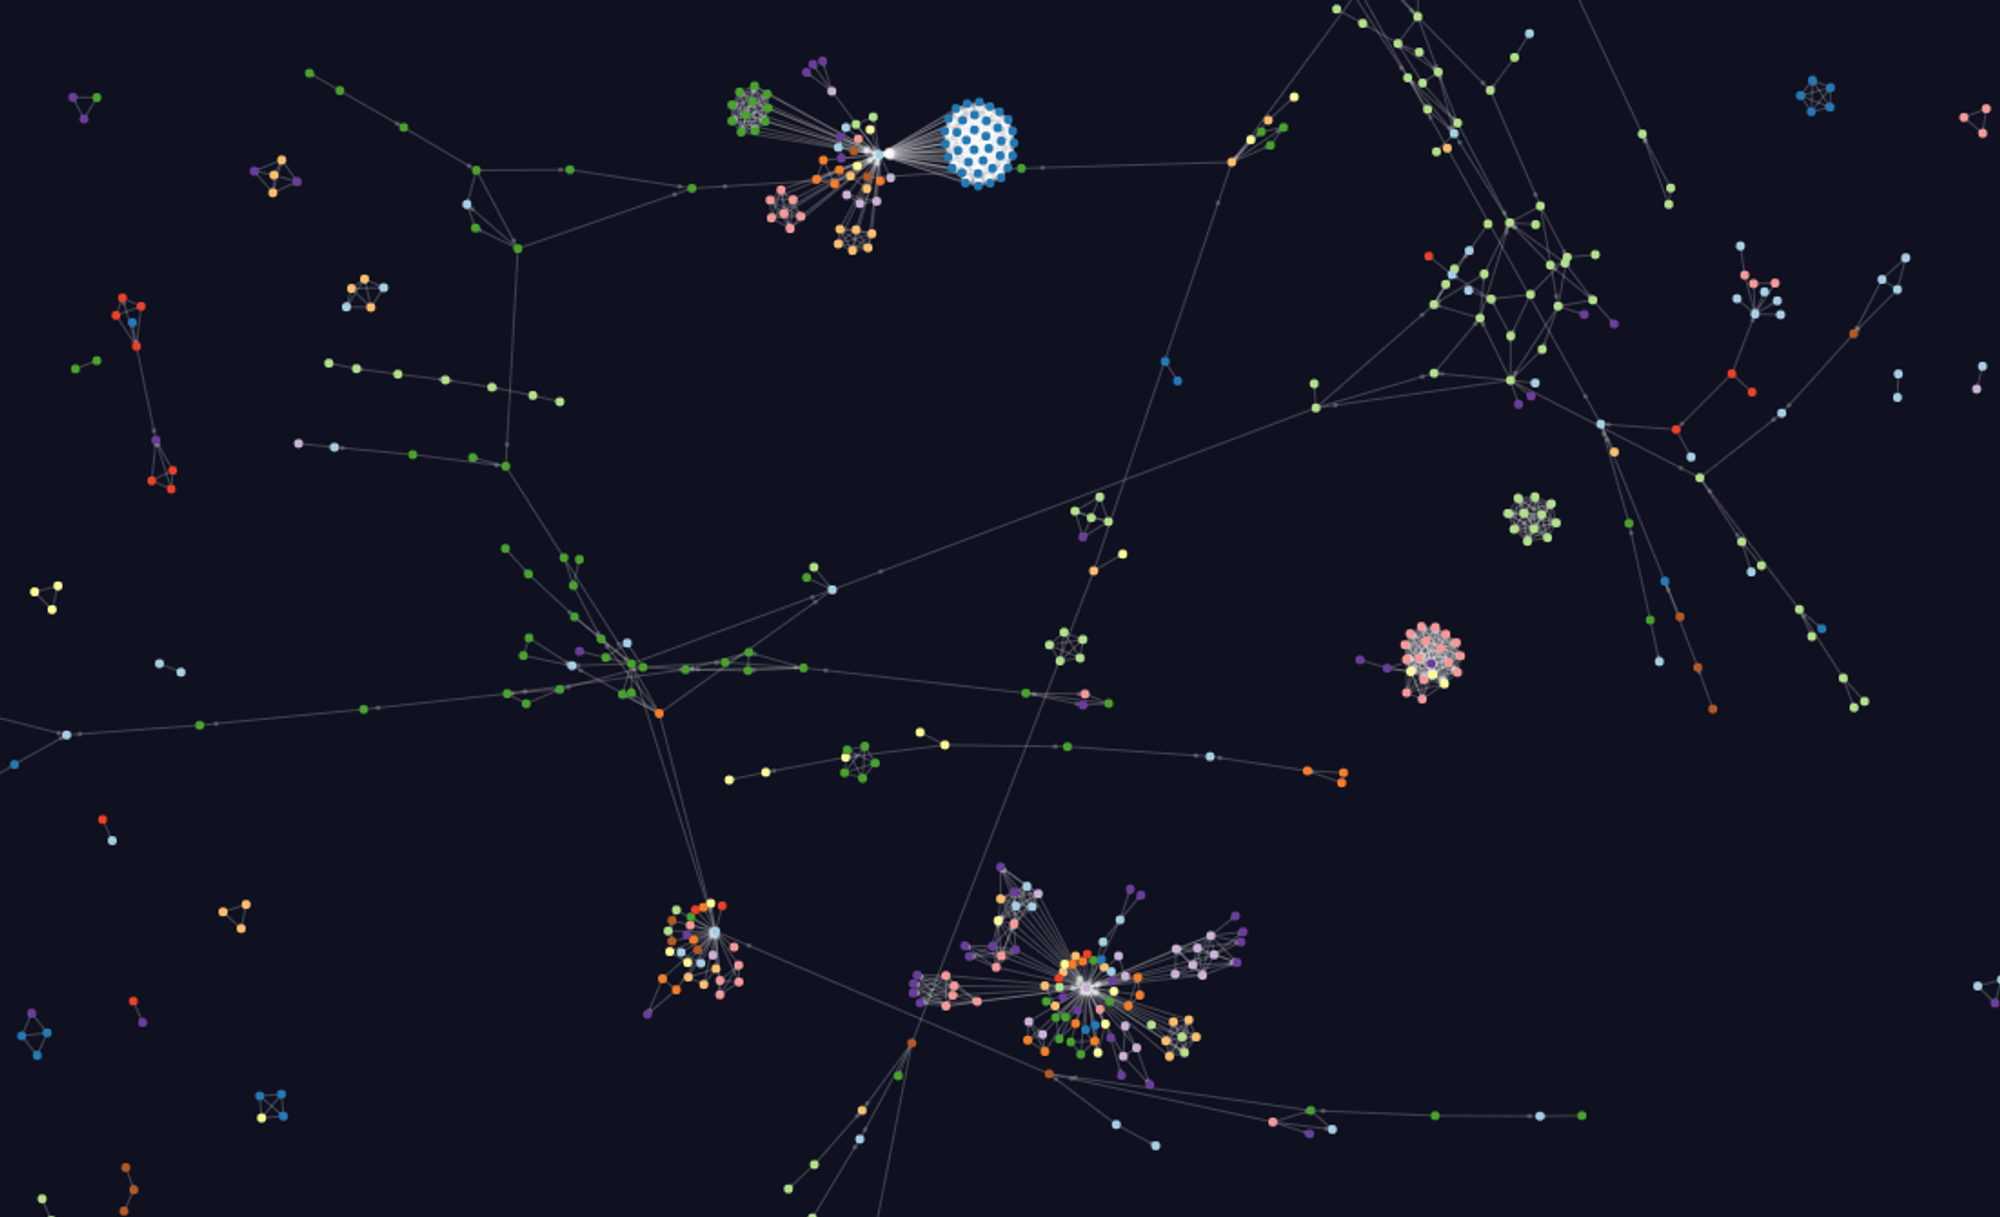 GitHub - vasturiano/force-graph: Force-directed graph rendered on HTML5 canvas